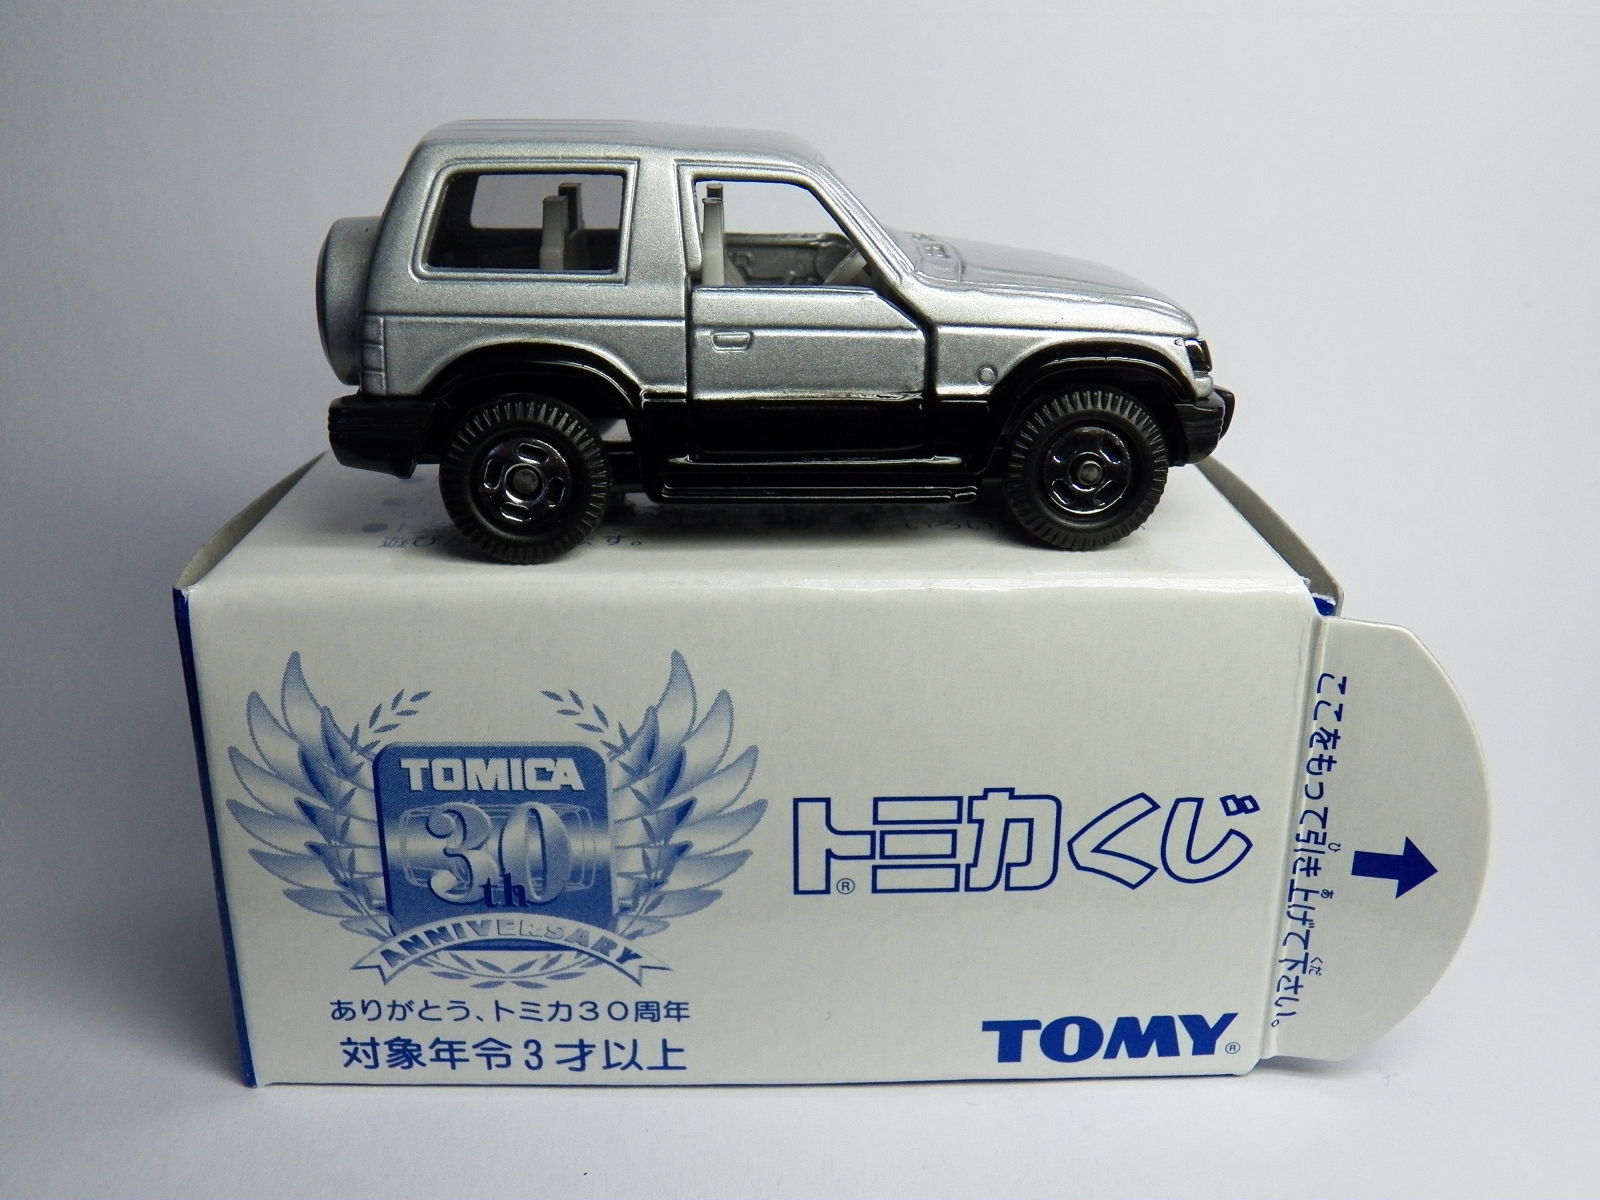 Illustration for article titled Tomica Tuesday Mitsubishi Pajero 1/61 scale